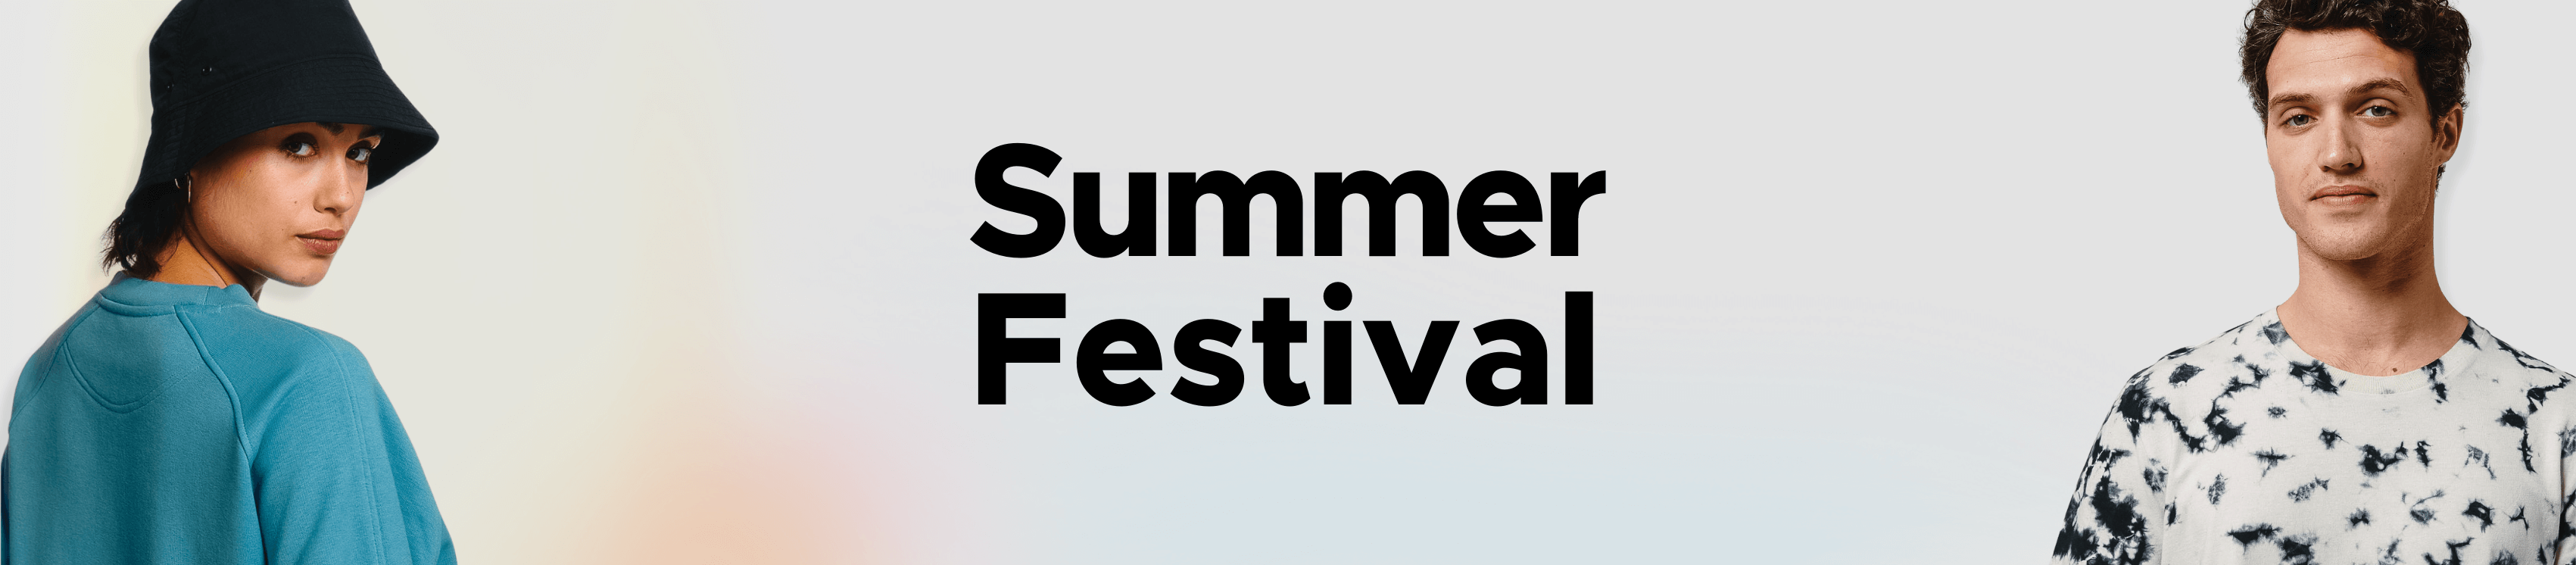 Summer Festival Banner - Print On Demand Collection